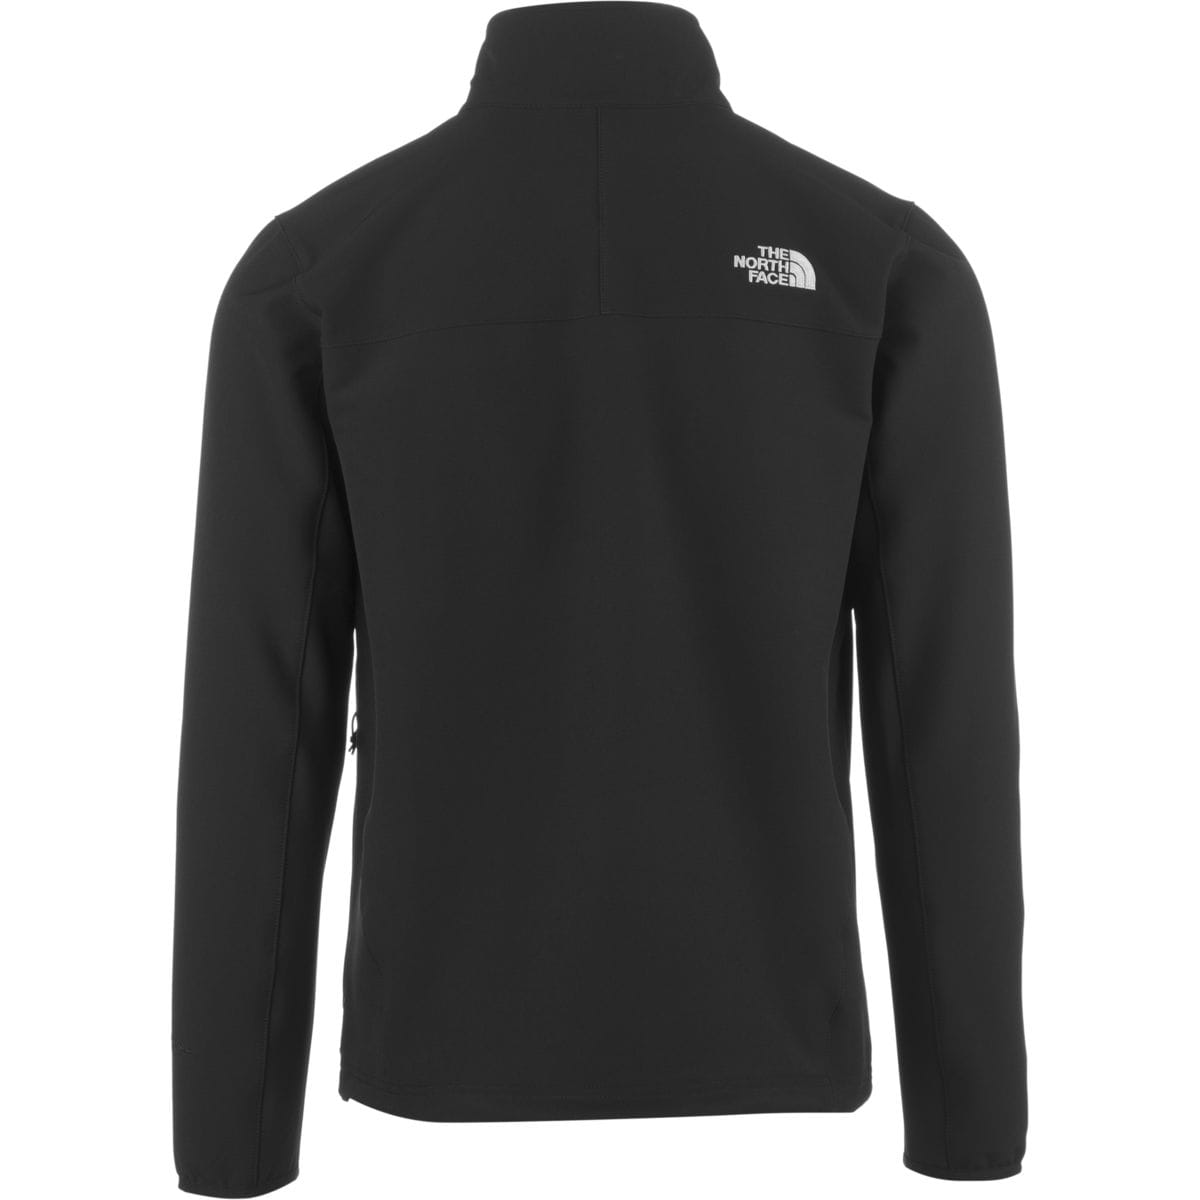 The North Face Apex Pneumatic Softshell Jacket - Men's | Backcountry.com